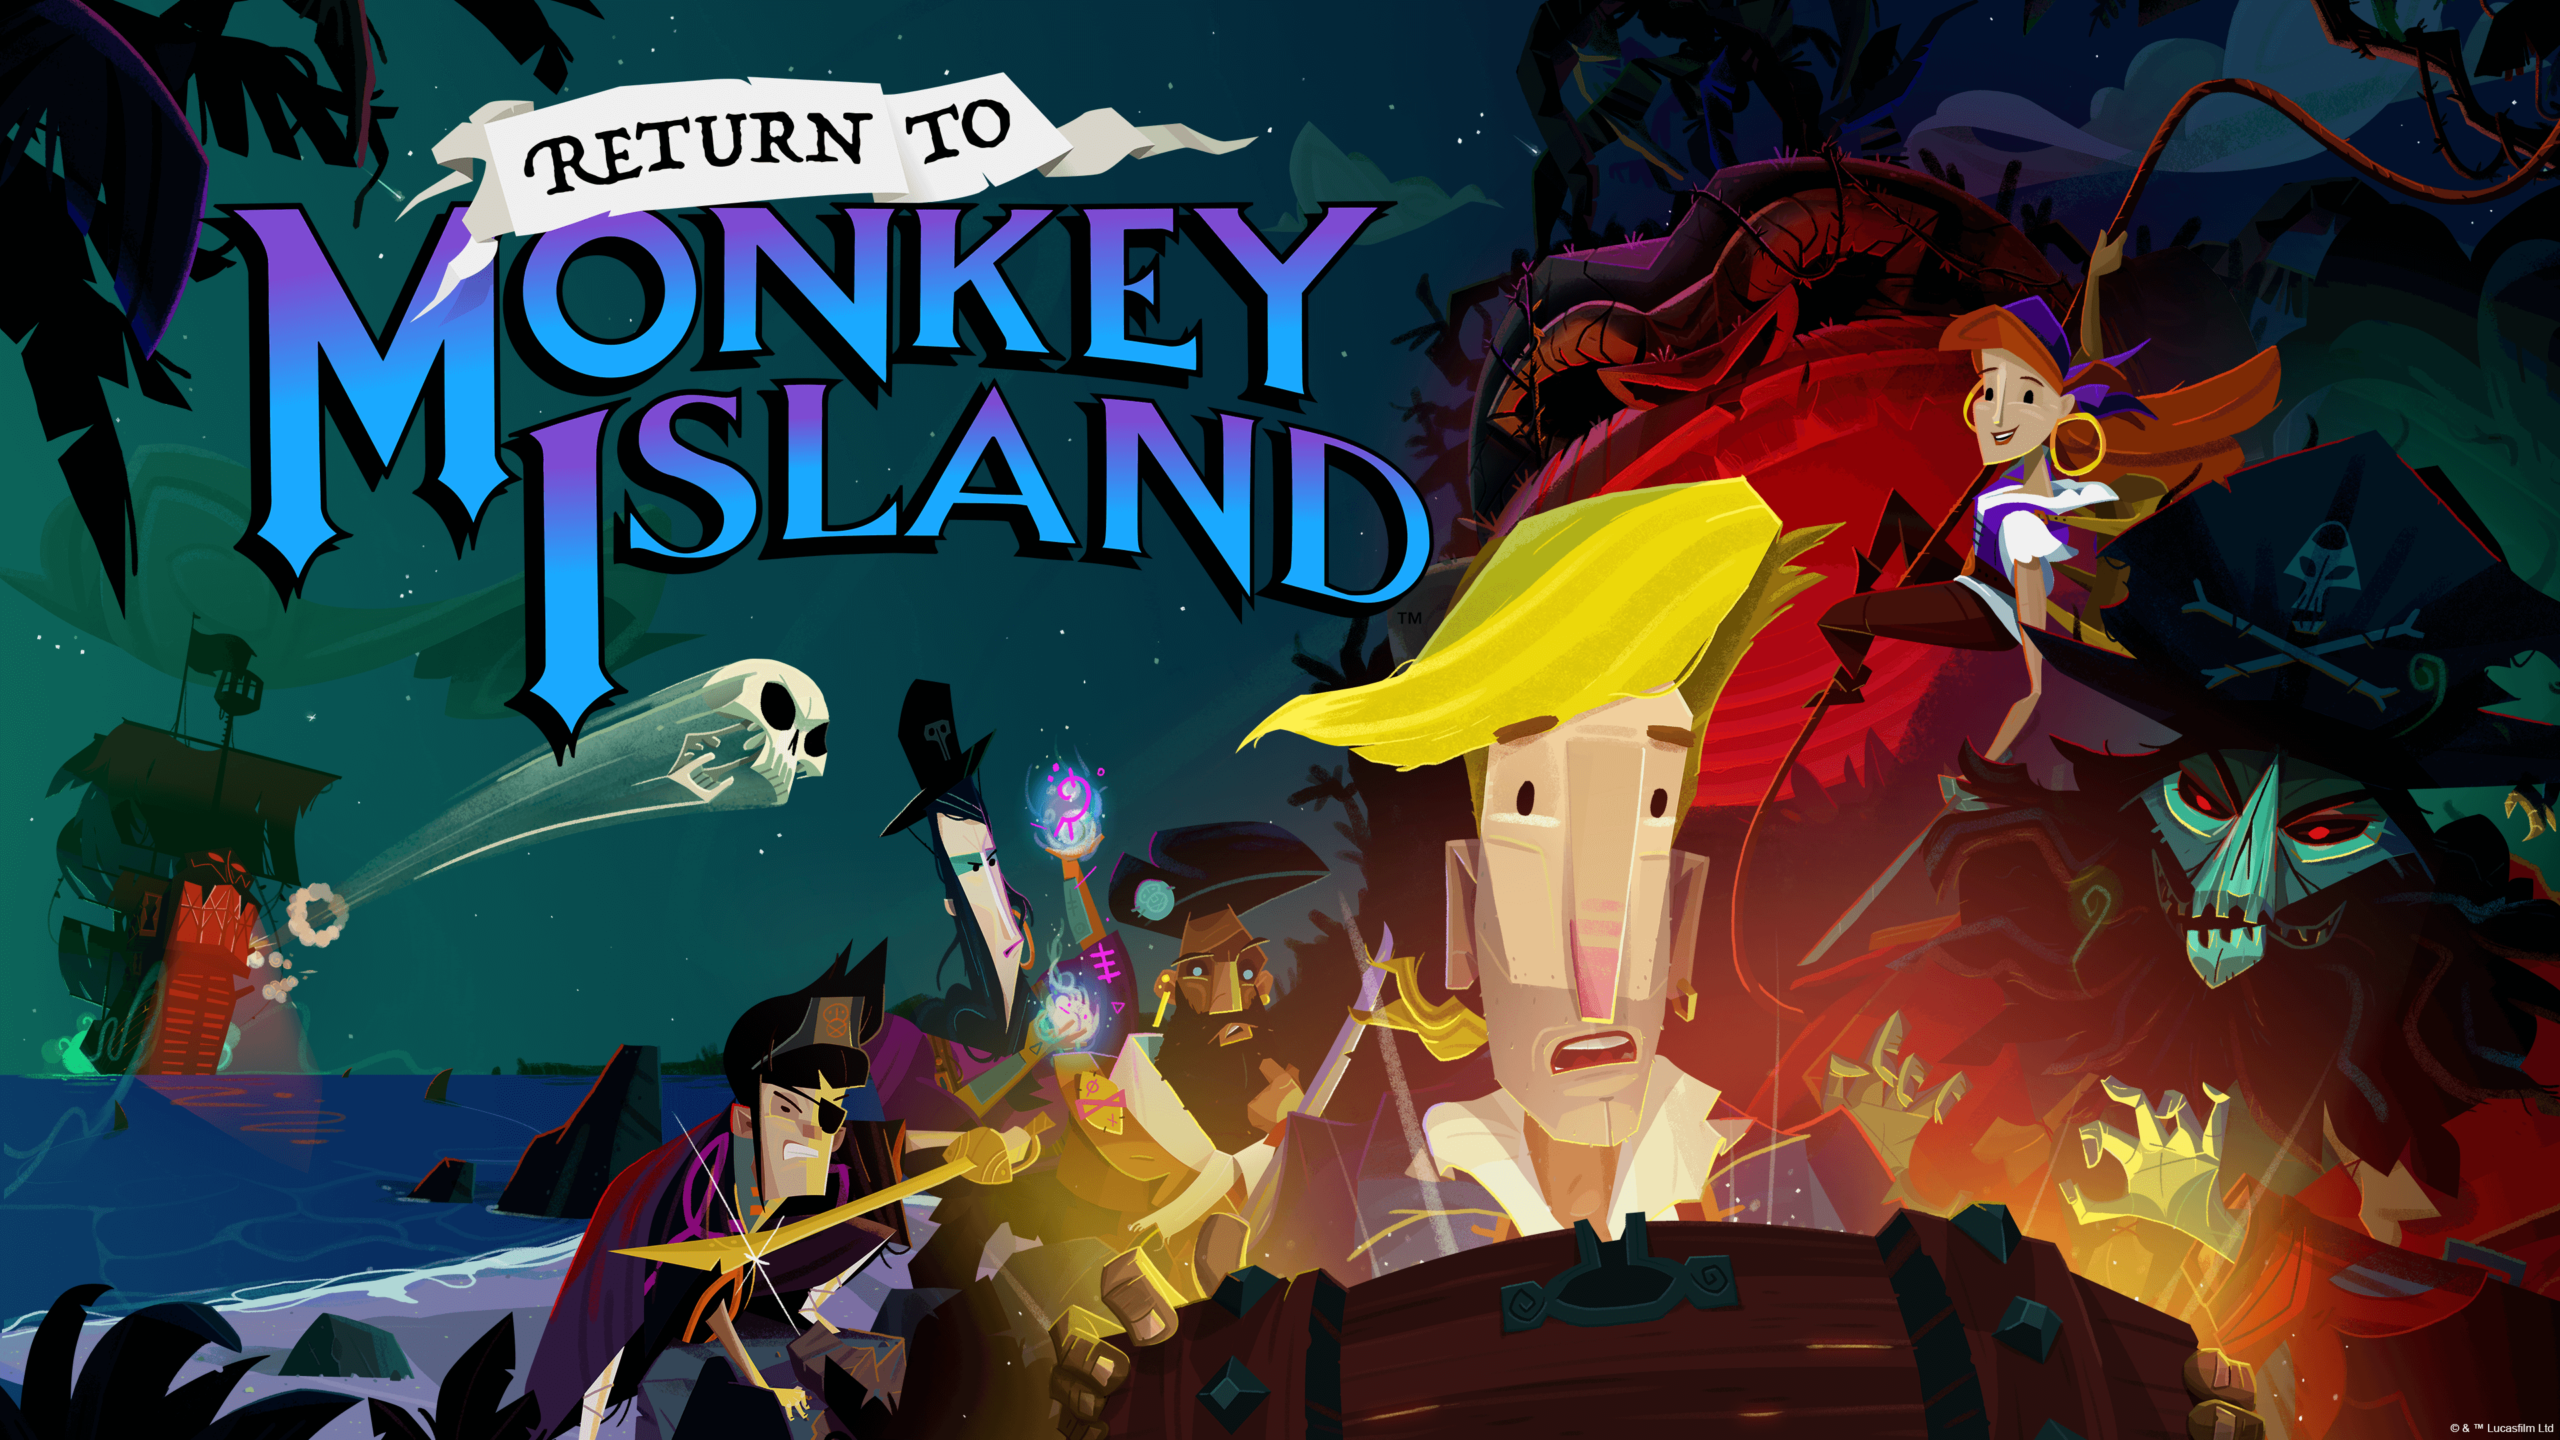 Return to Monkey Island: PC Games interview with Ron Gilbert!